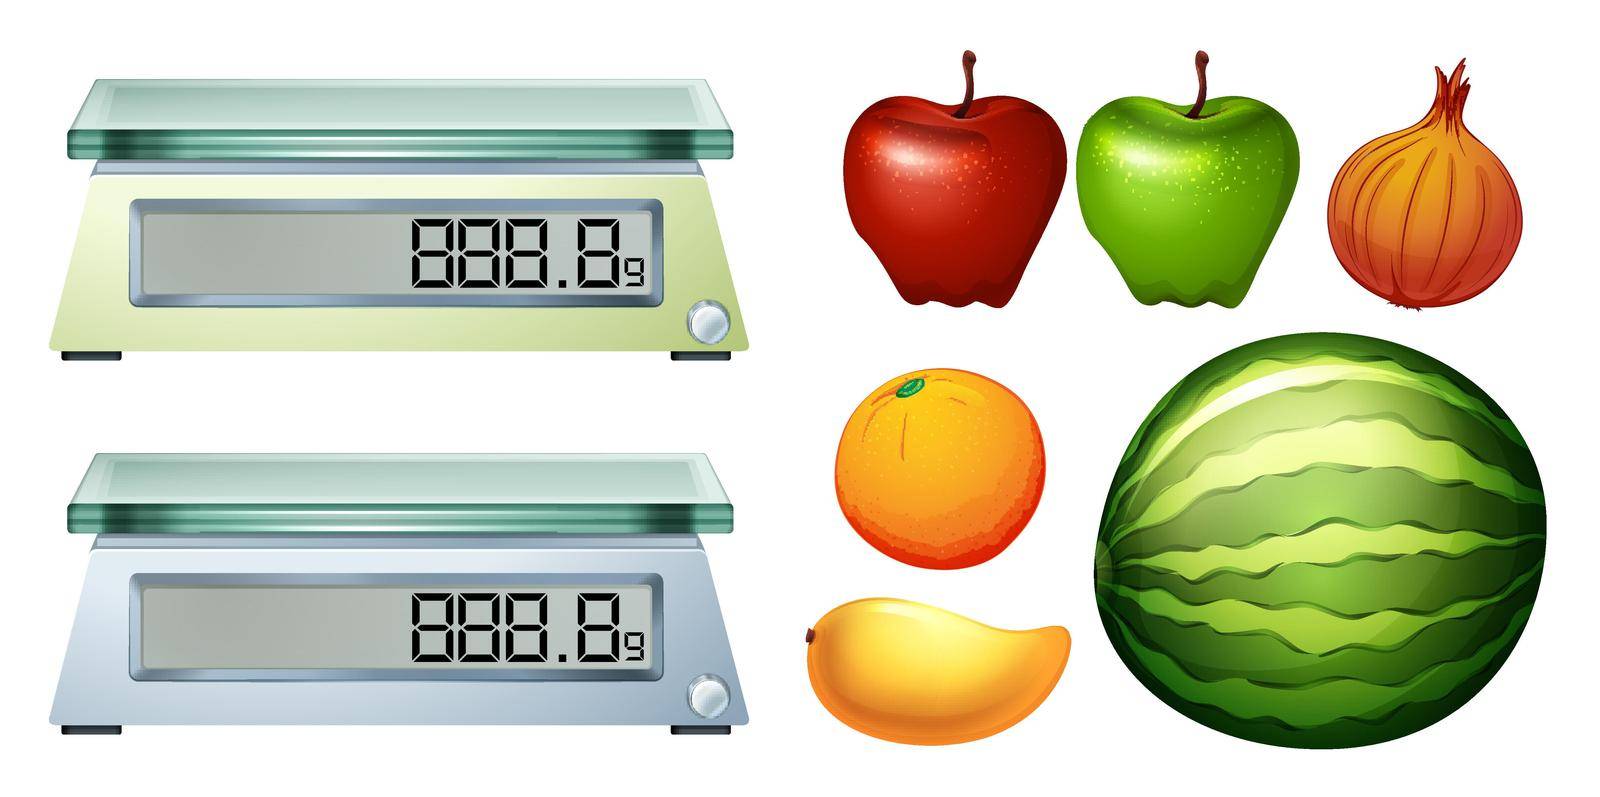 Measurement scales and fresh fruits by iimages